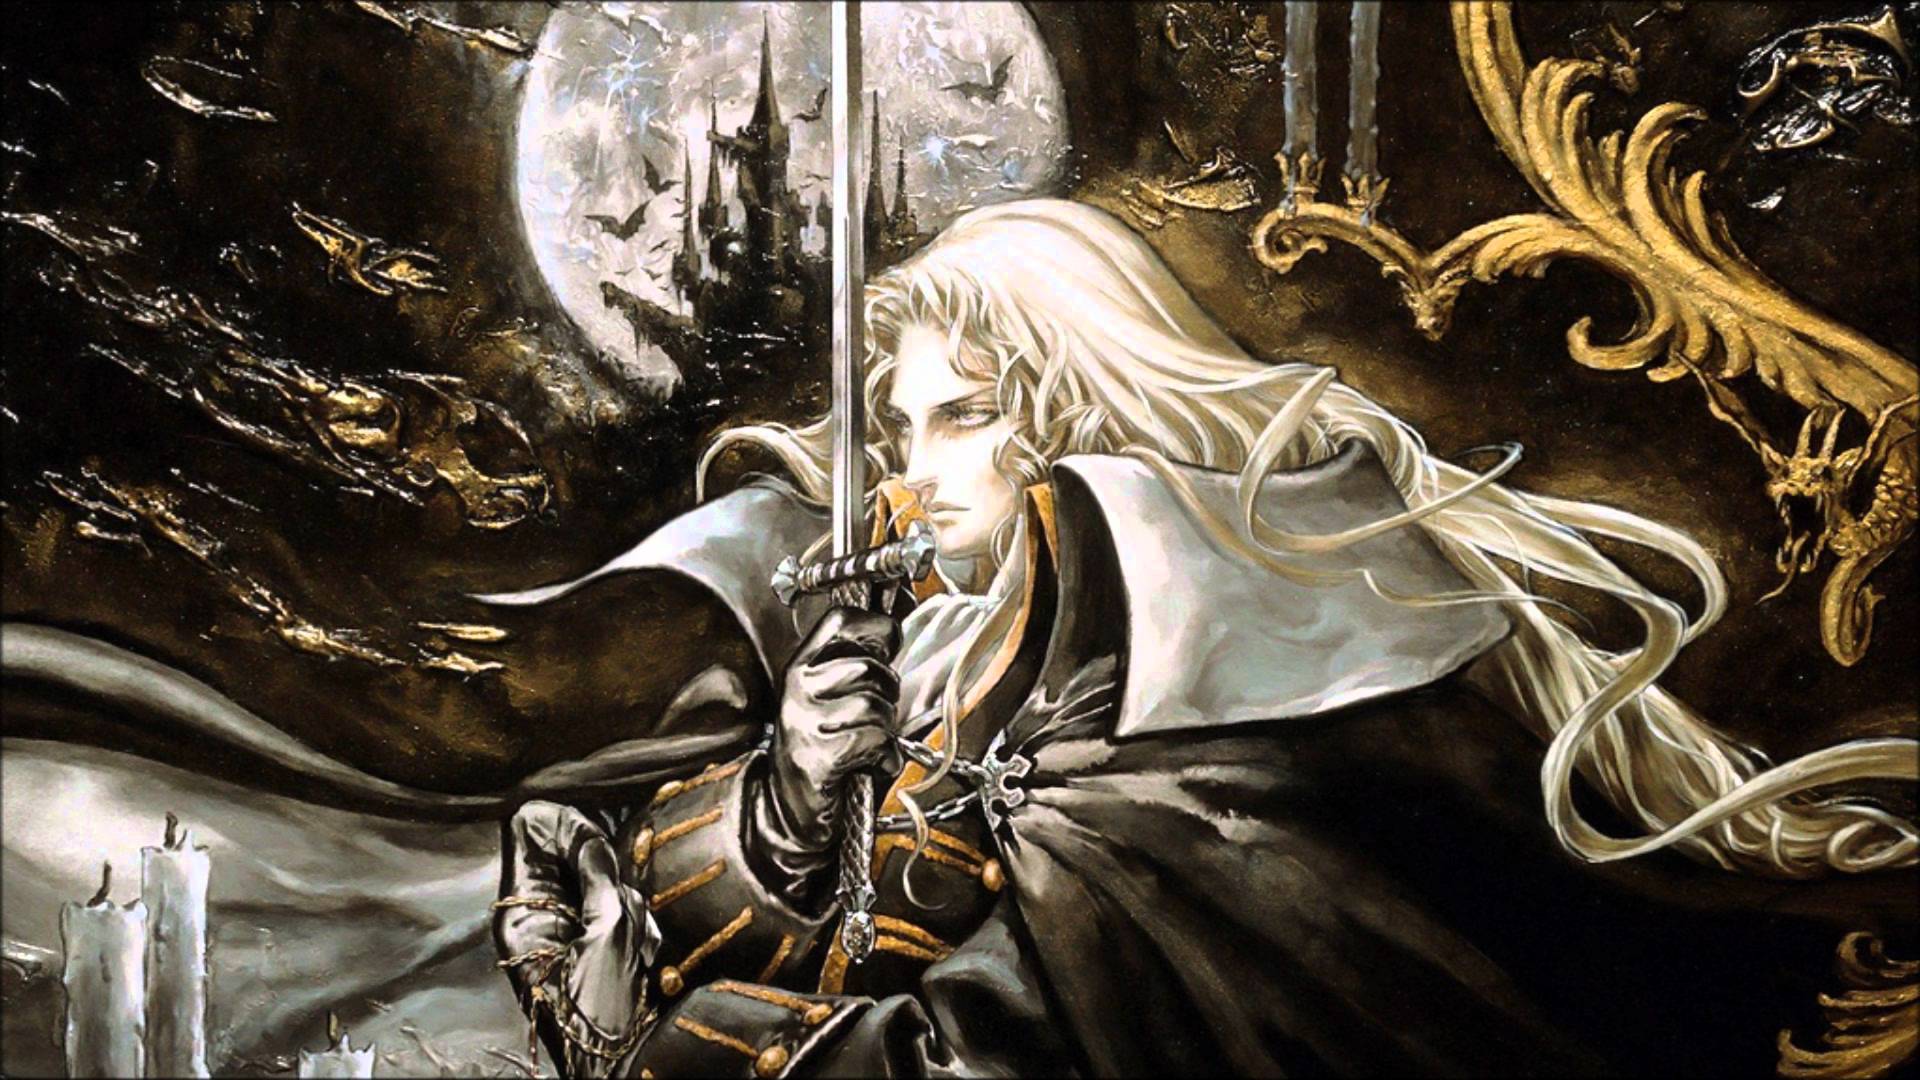 Alucard in Castlevania: Symphony of the Night